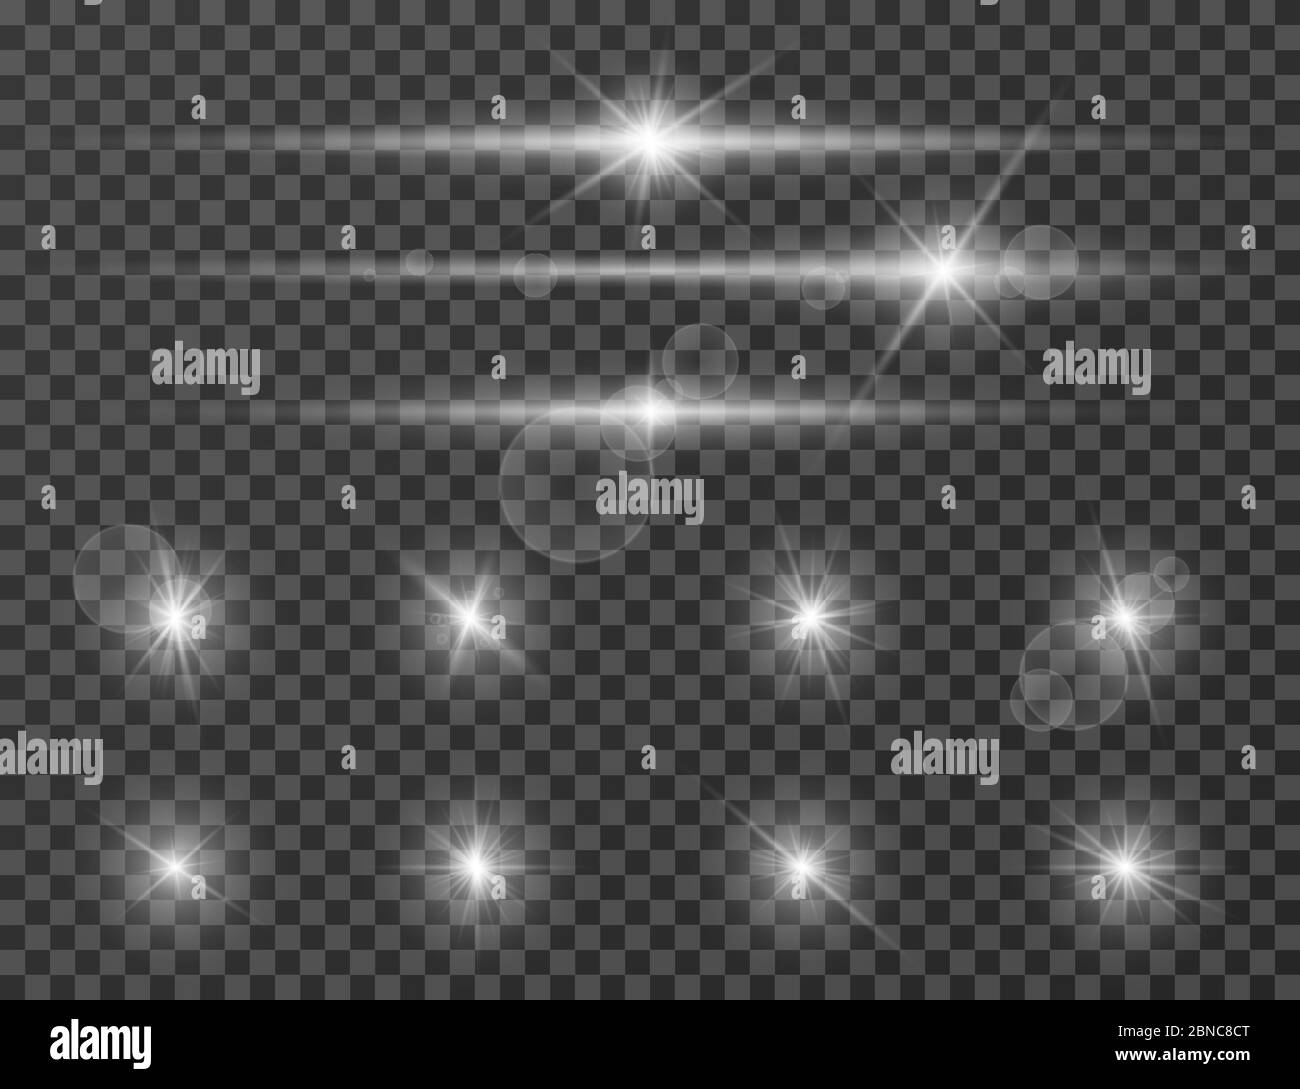 Light flare. Optical lens glowing flashlight effect. Gleaming camera flash. Realistic sparkles vector set. Star flash and shine bright illustration Stock Vector